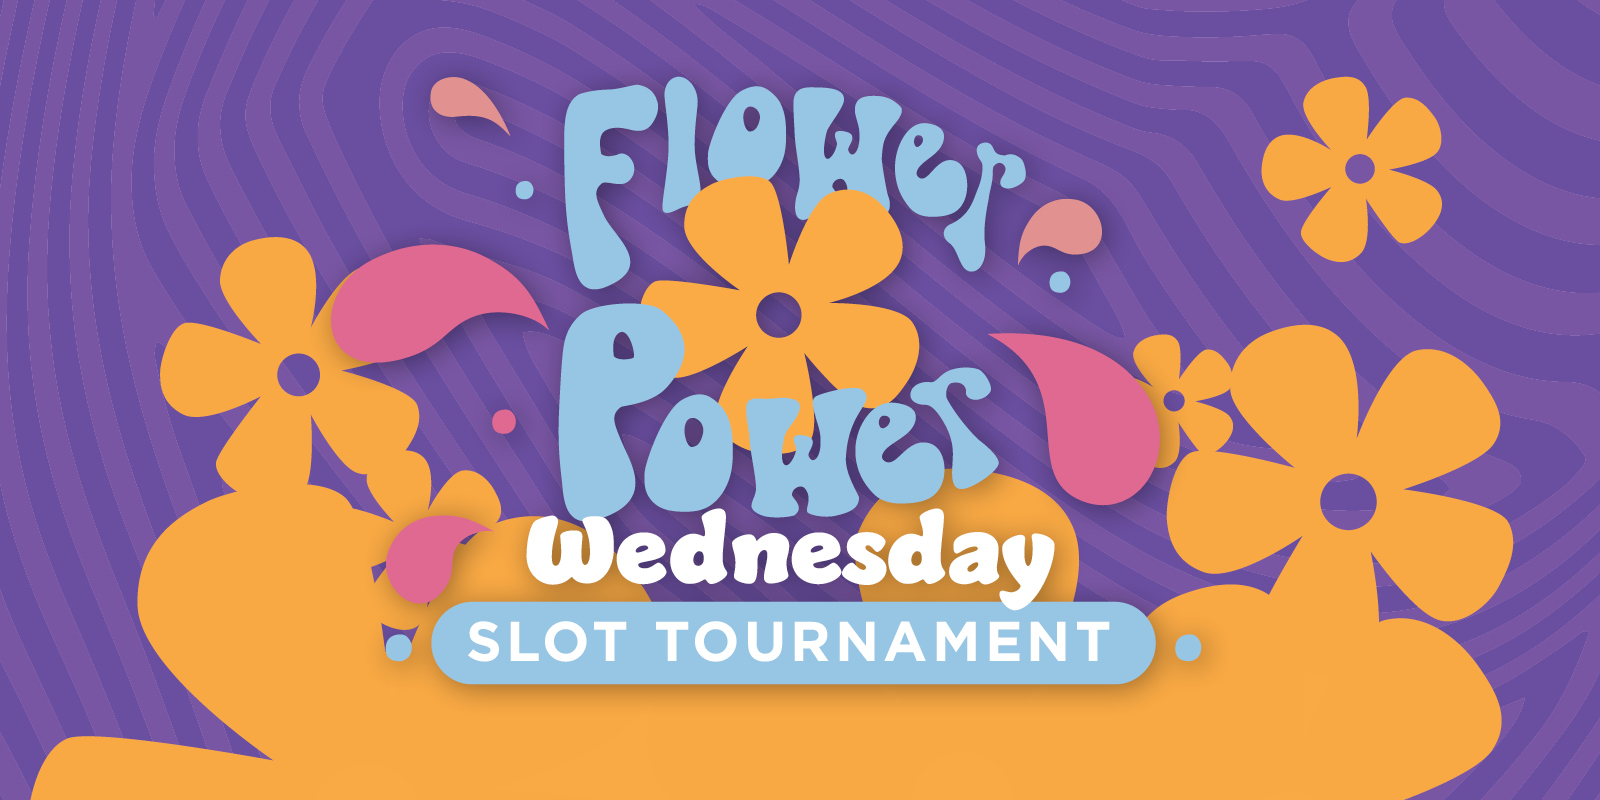 Flower Power Slot Tournament graphic with 70's look and feel. It says Wednesday and is orange, pink and purple.